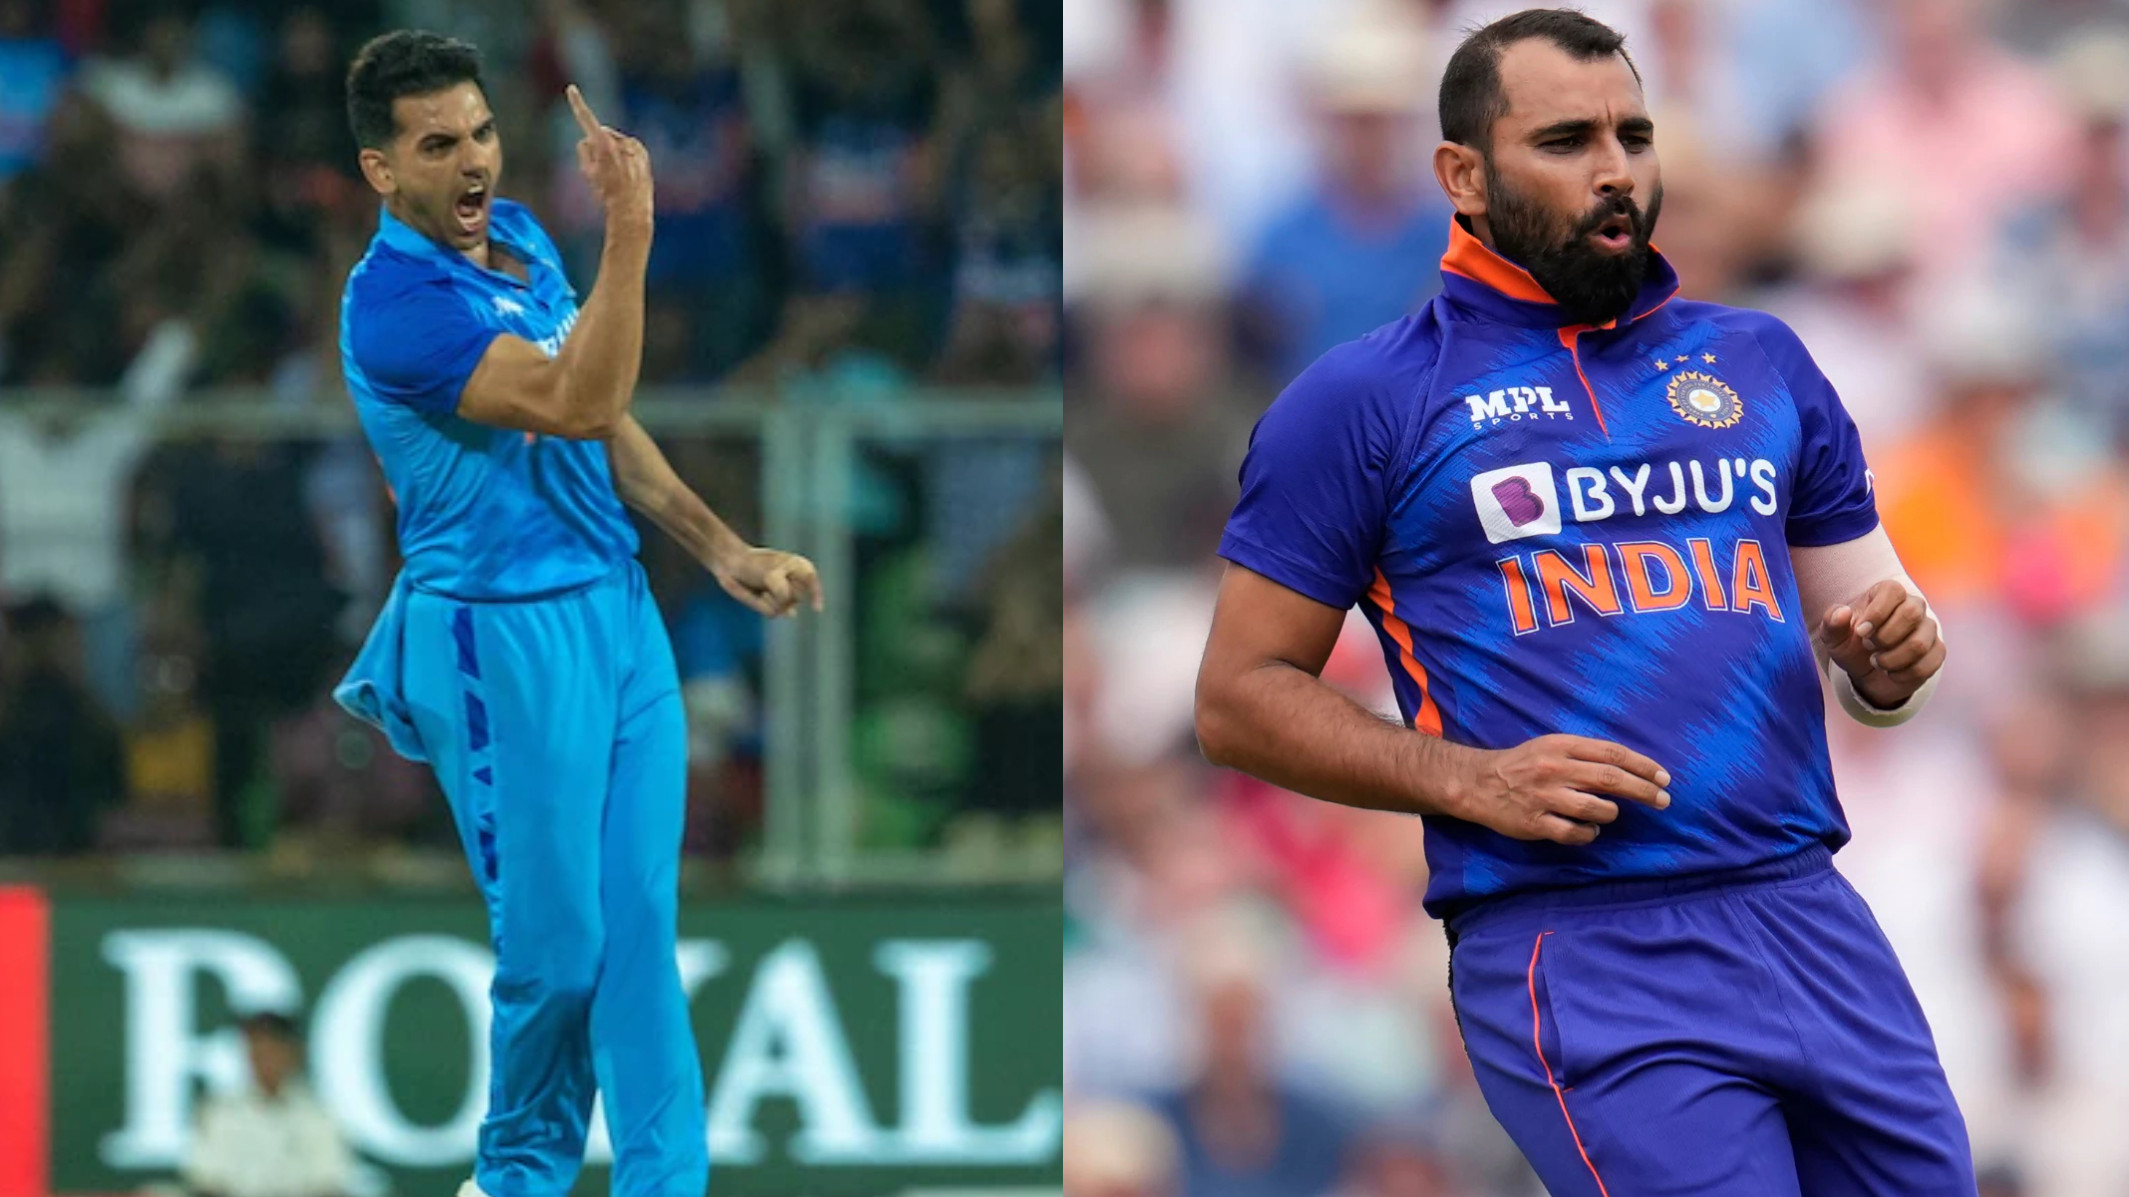 T20 World Cup 2022: Deepak Chahar sustains twisted ankle; Mohammad Shami to fly to Australia in 3-4 days - Report